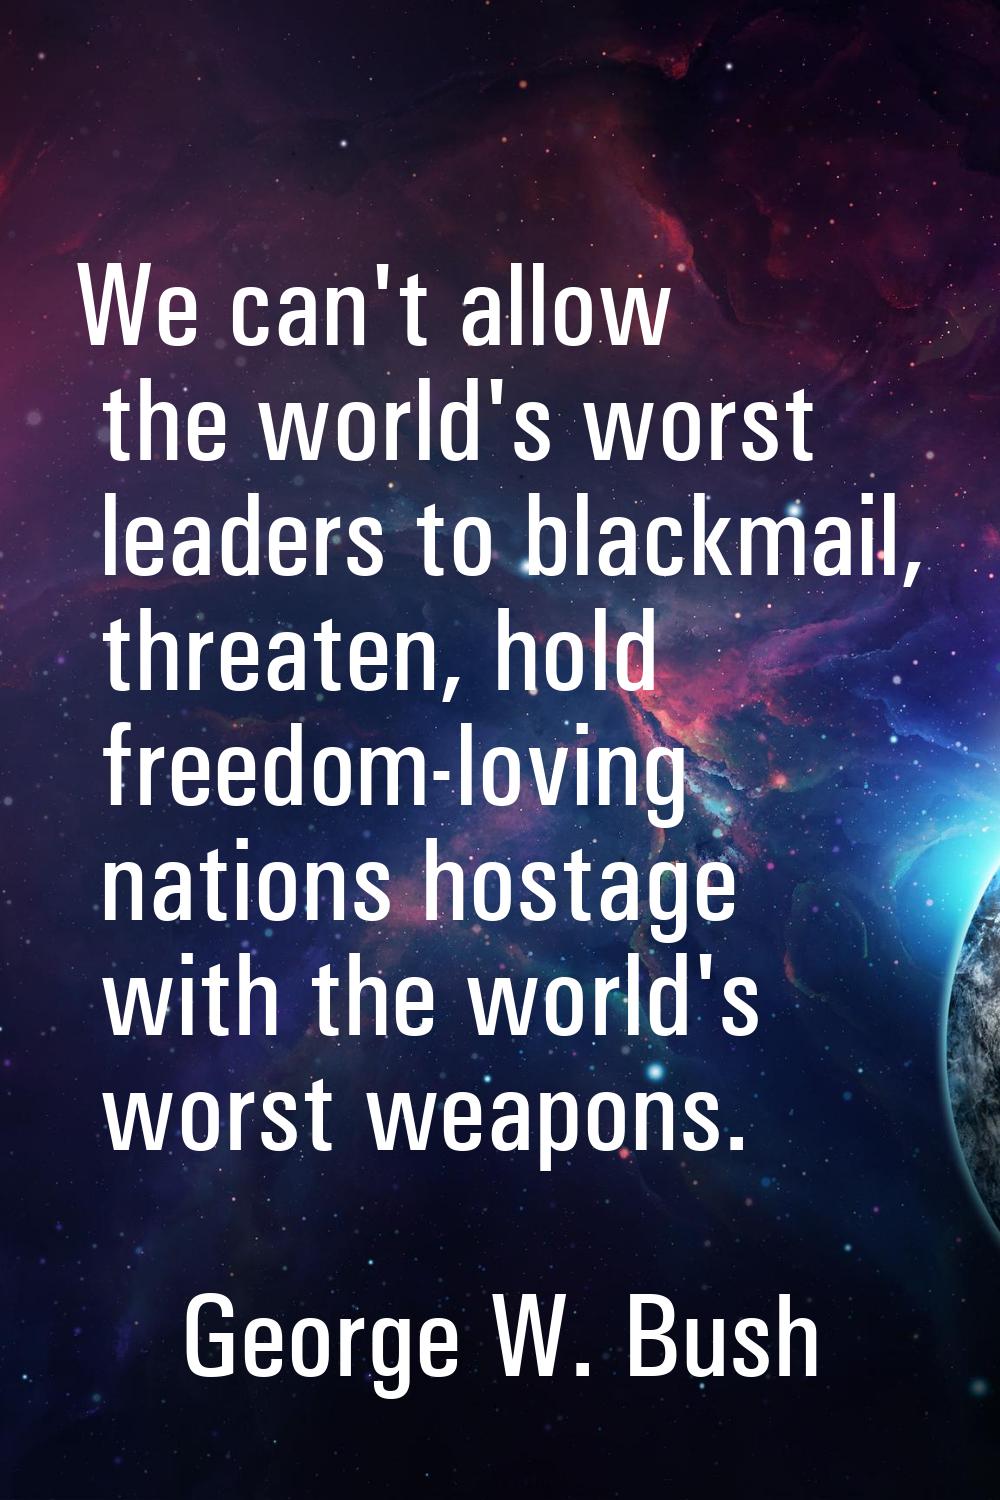 We can't allow the world's worst leaders to blackmail, threaten, hold freedom-loving nations hostag